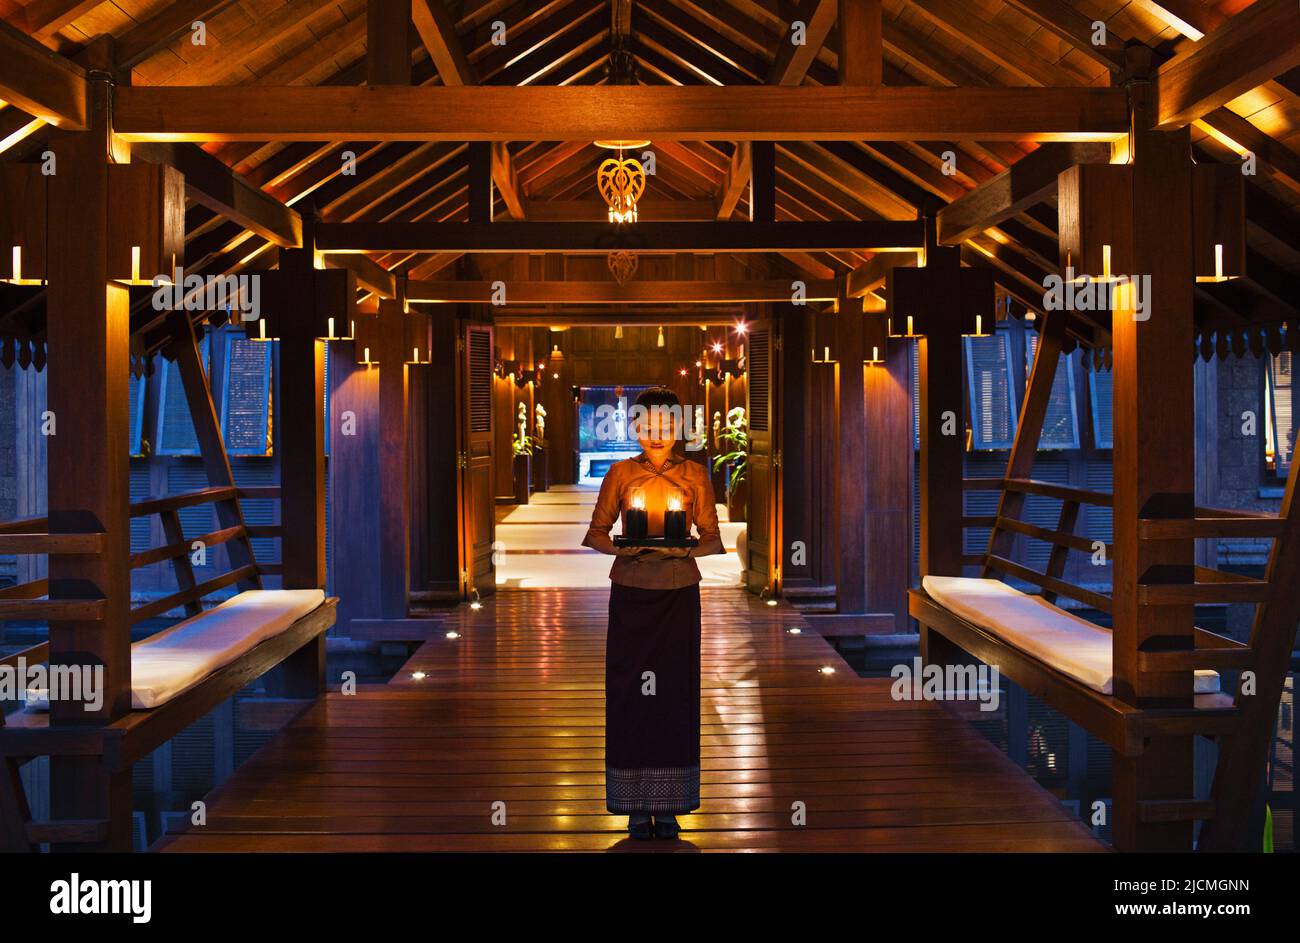 A young Asian female hotel staff member welcomes guests with a tray of candles at dusk at the entrance of a hotel, Siem Reap, Cambodia. Stock Photo